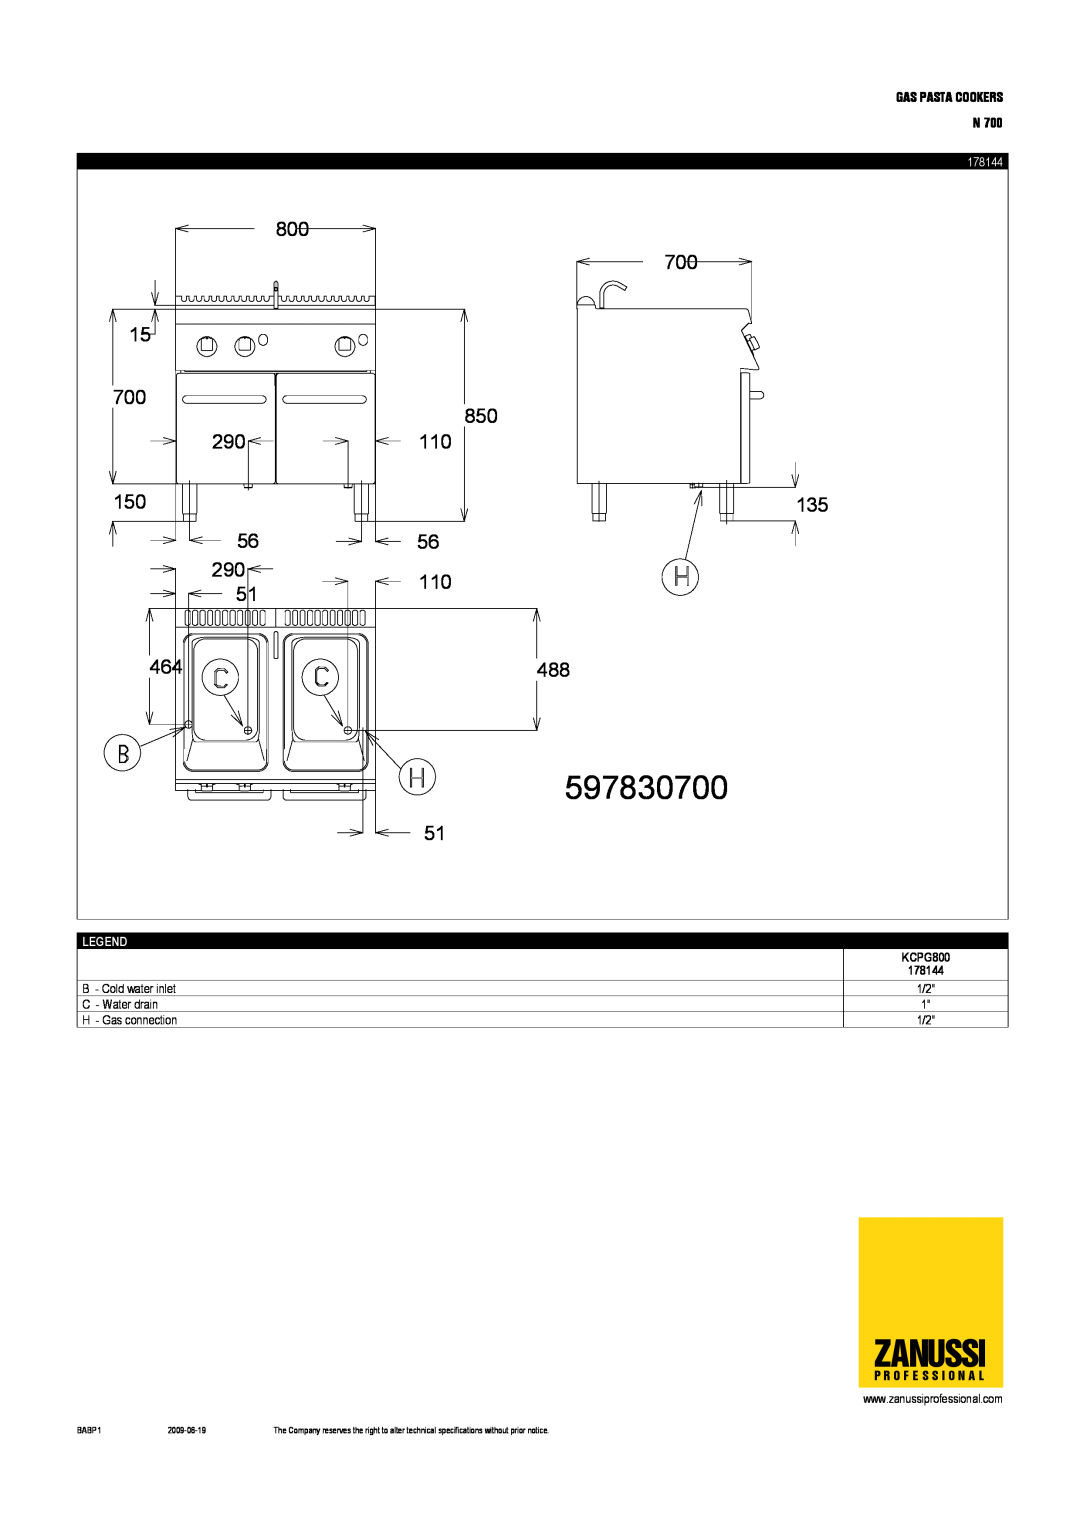 Zanussi 6204 dimensions 597830700, Zanussi, Cold water inlet, Water drain, Gas connection 